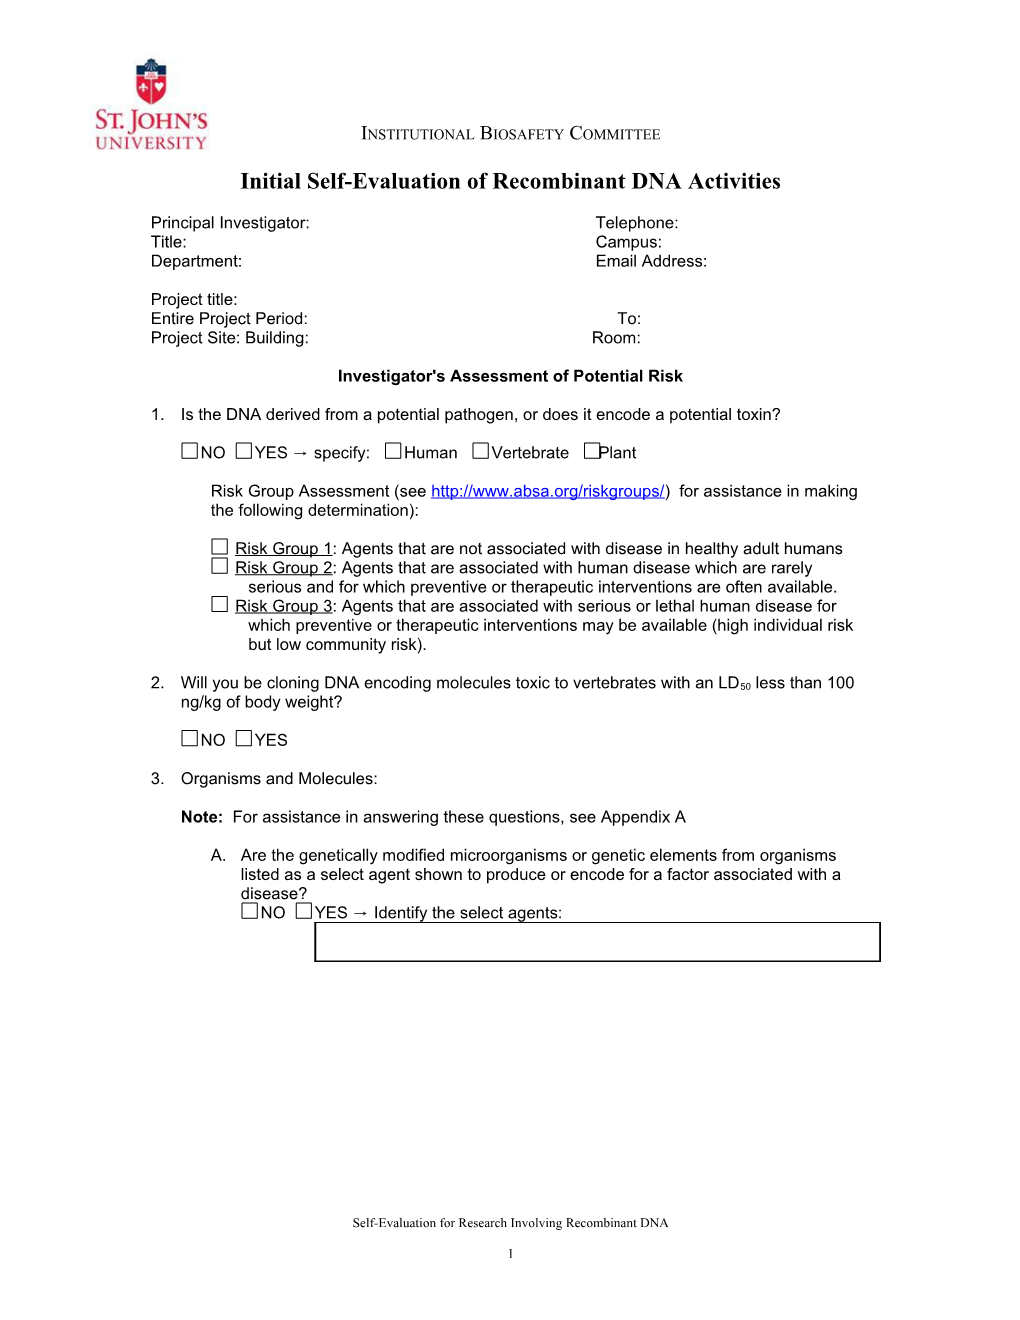 Initial Self-Evaluation of Recombinant DNA Activities